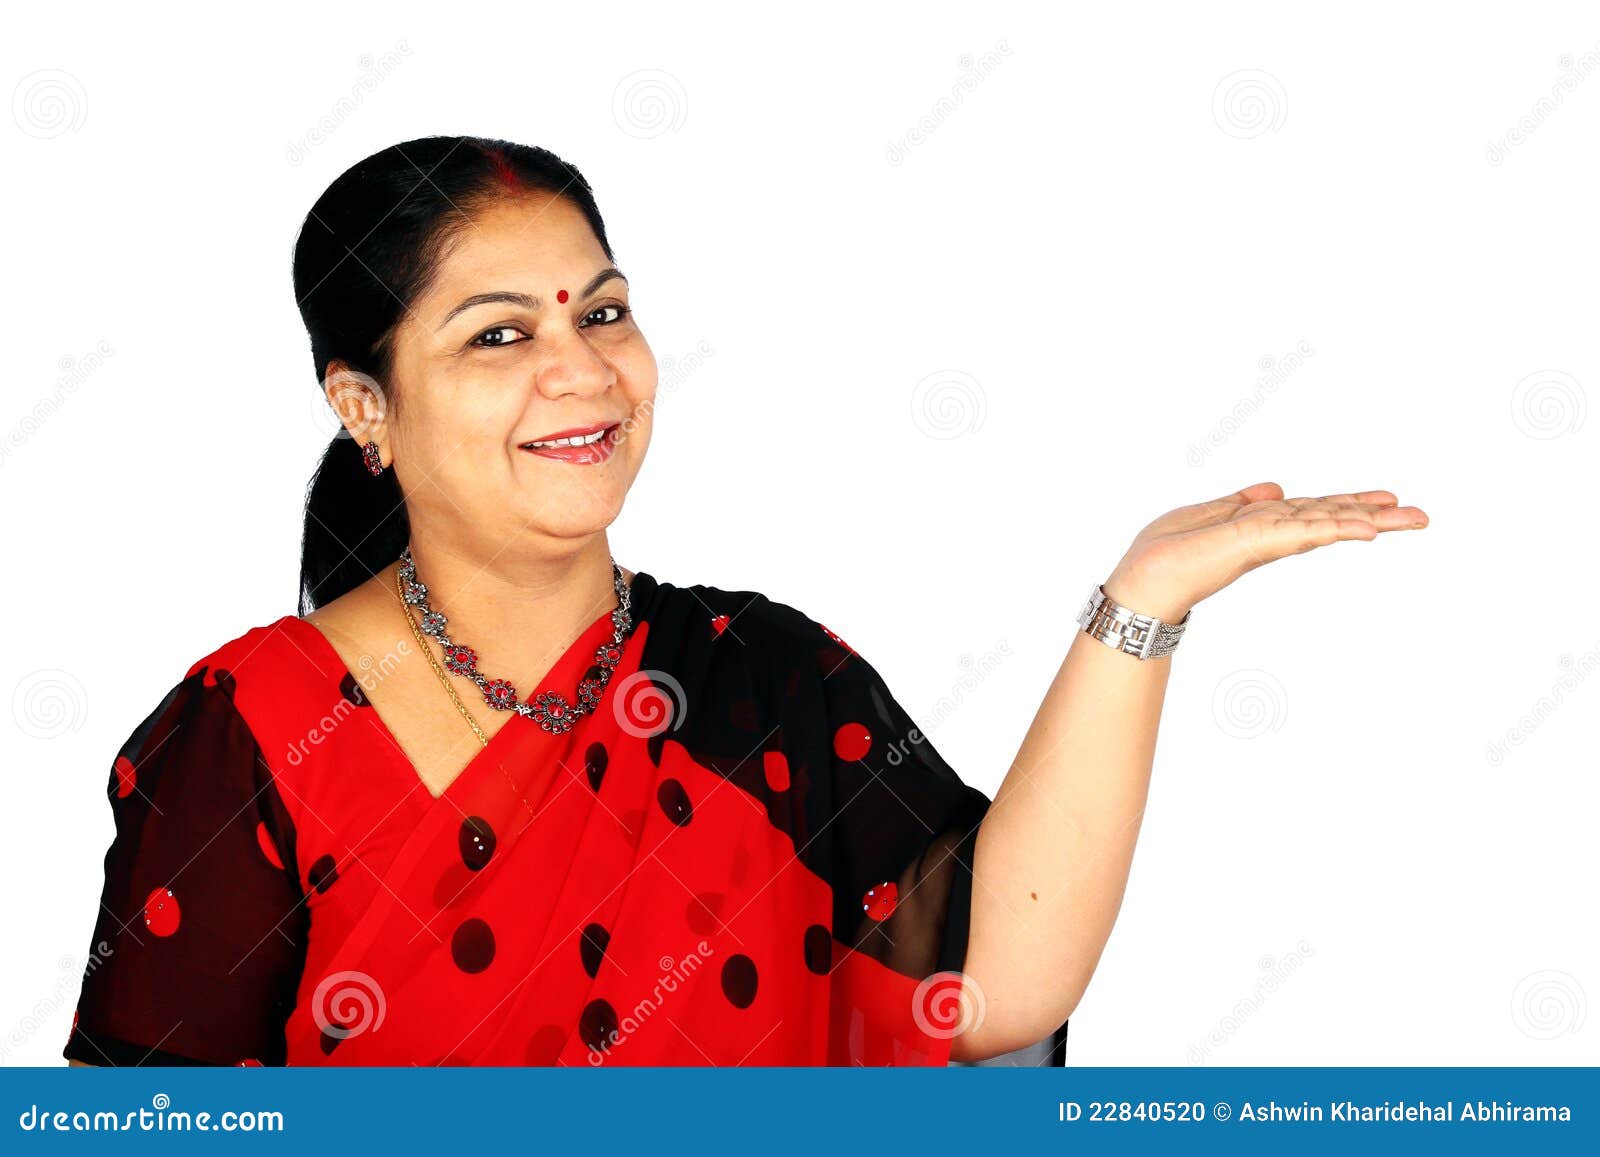 indian woman presenting.